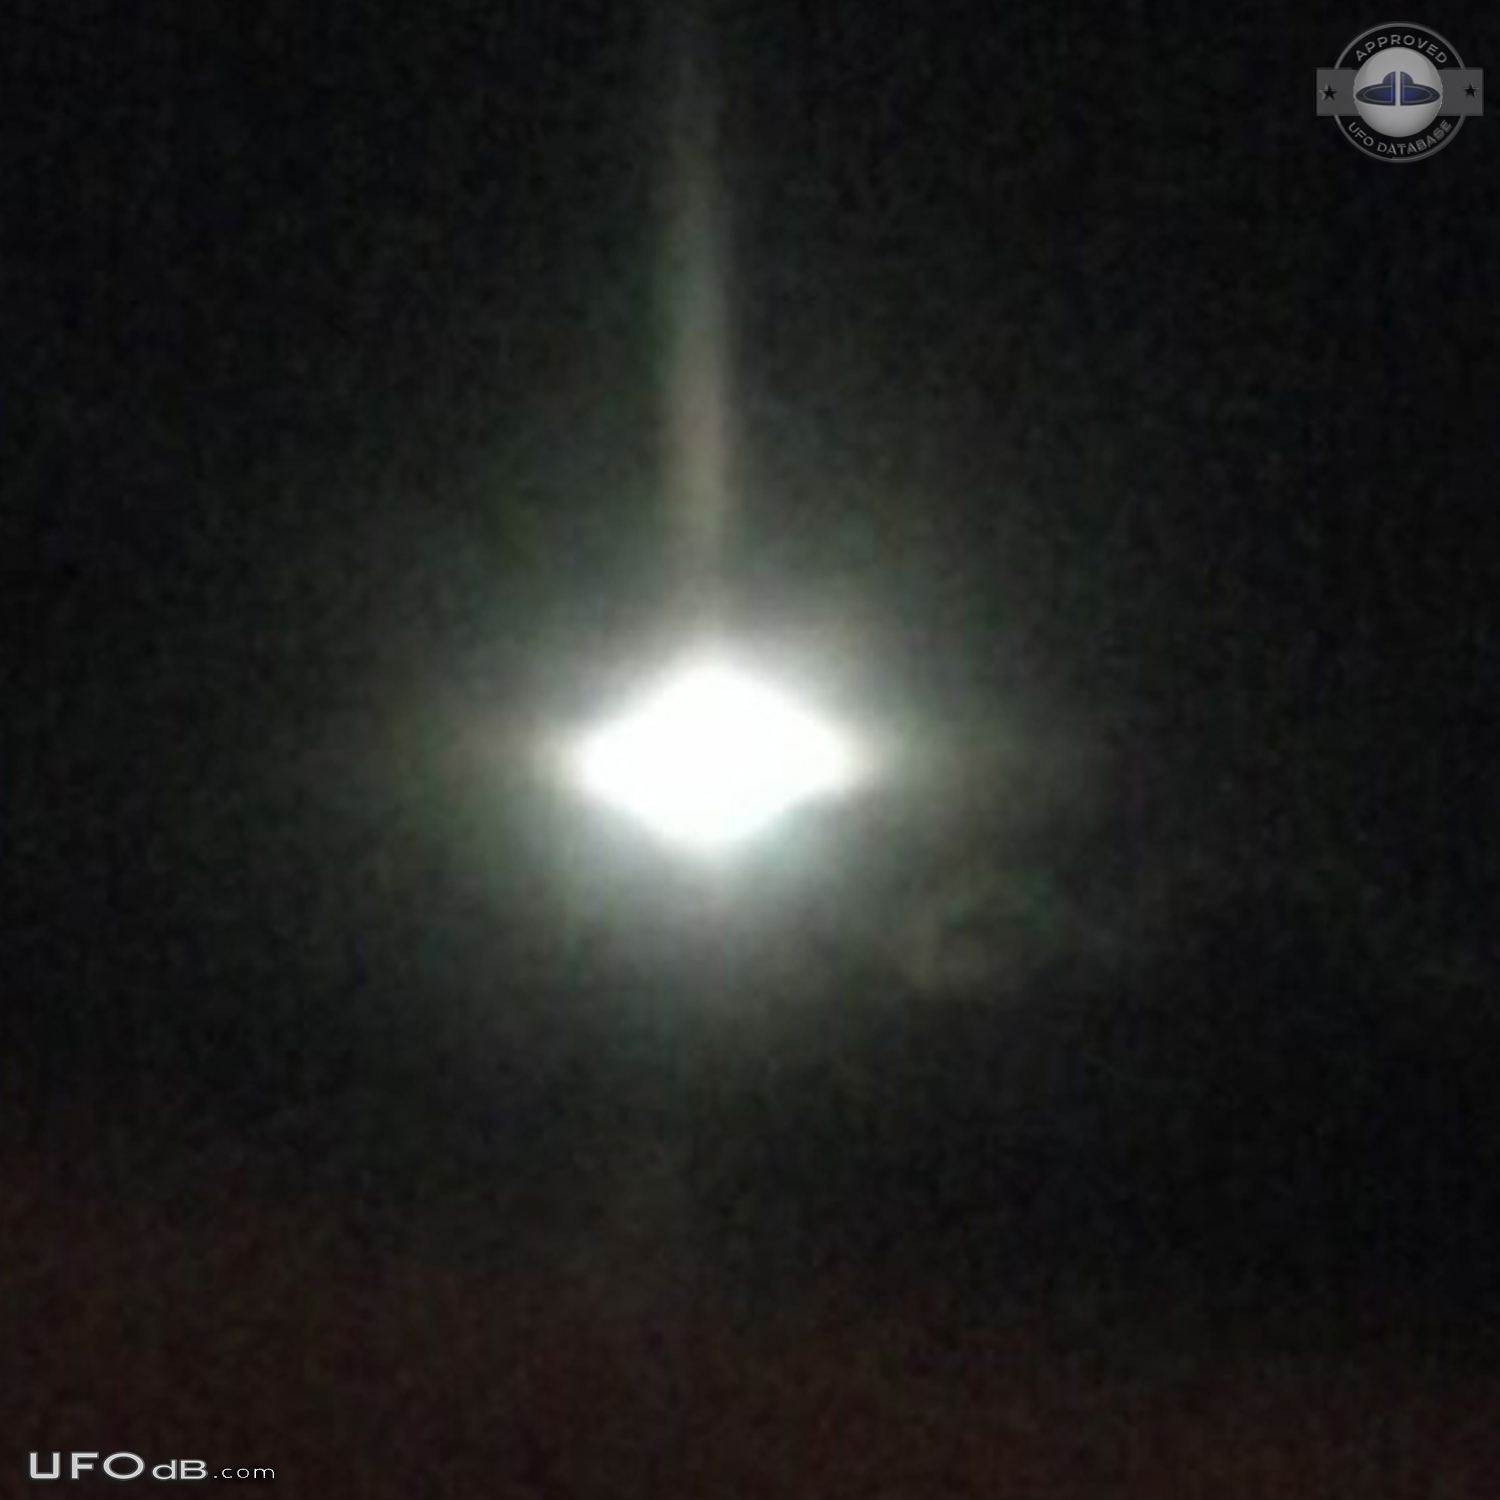 On the porch and snapped a couple pictures before UFO left - 2014 UFO Picture #678-3